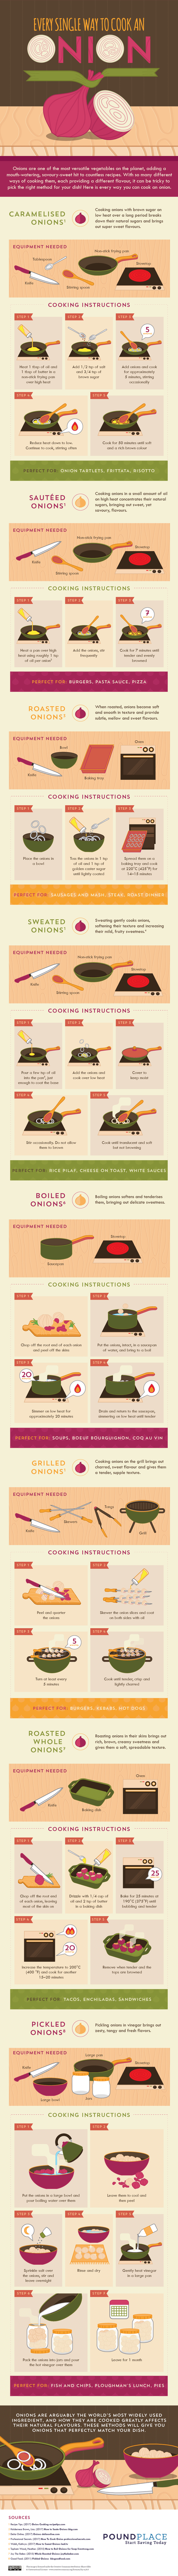 How many ways can you cook an Onion?!